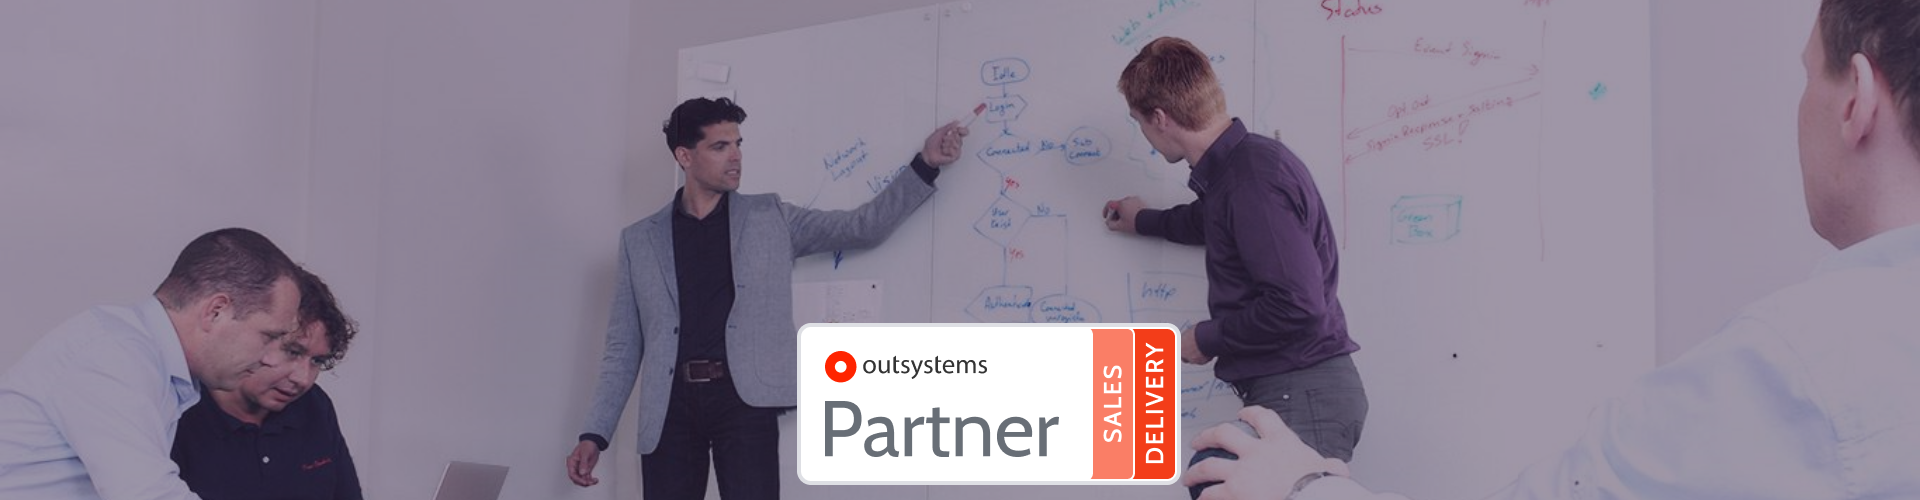 OutSystems Partner Phact